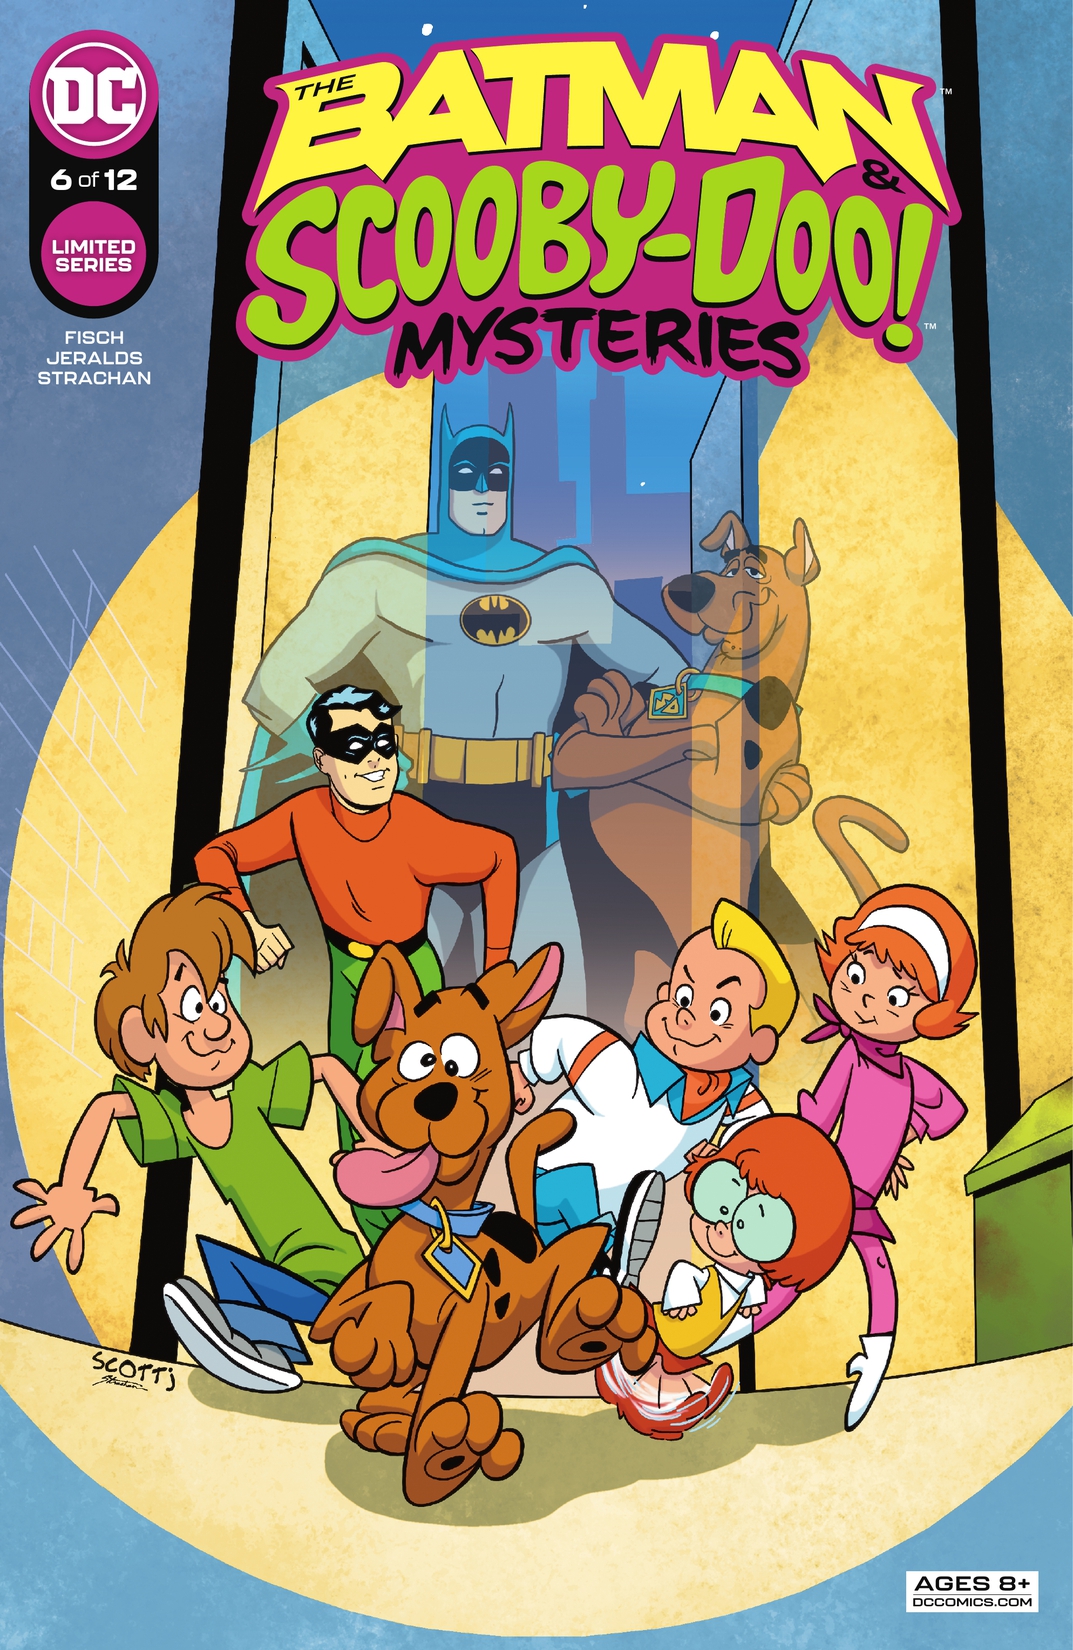 The Batman & Scooby-Doo Mysteries #6 preview images